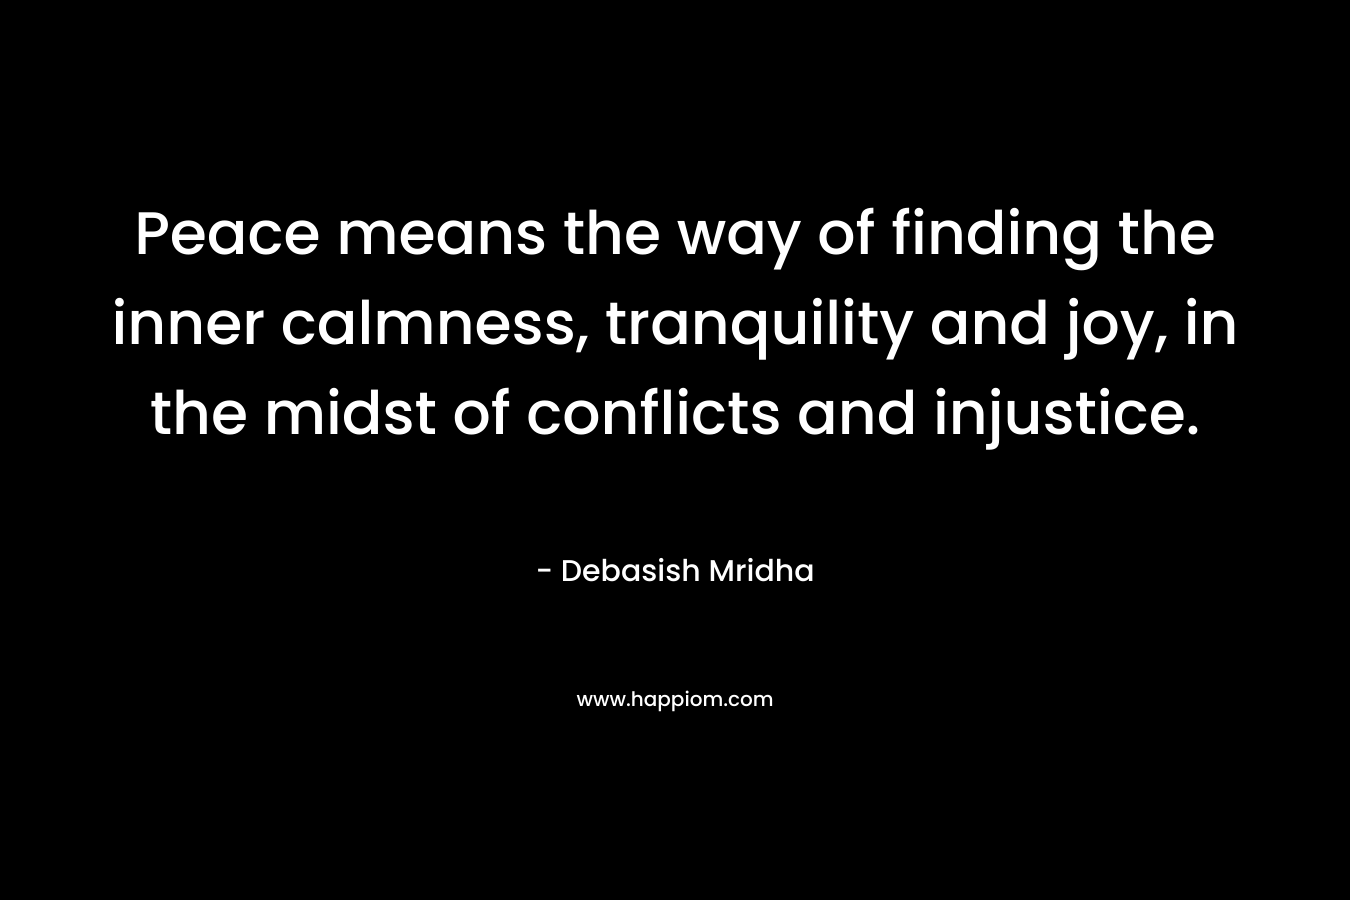 Peace means the way of finding the inner calmness, tranquility and joy, in the midst of conflicts and injustice.